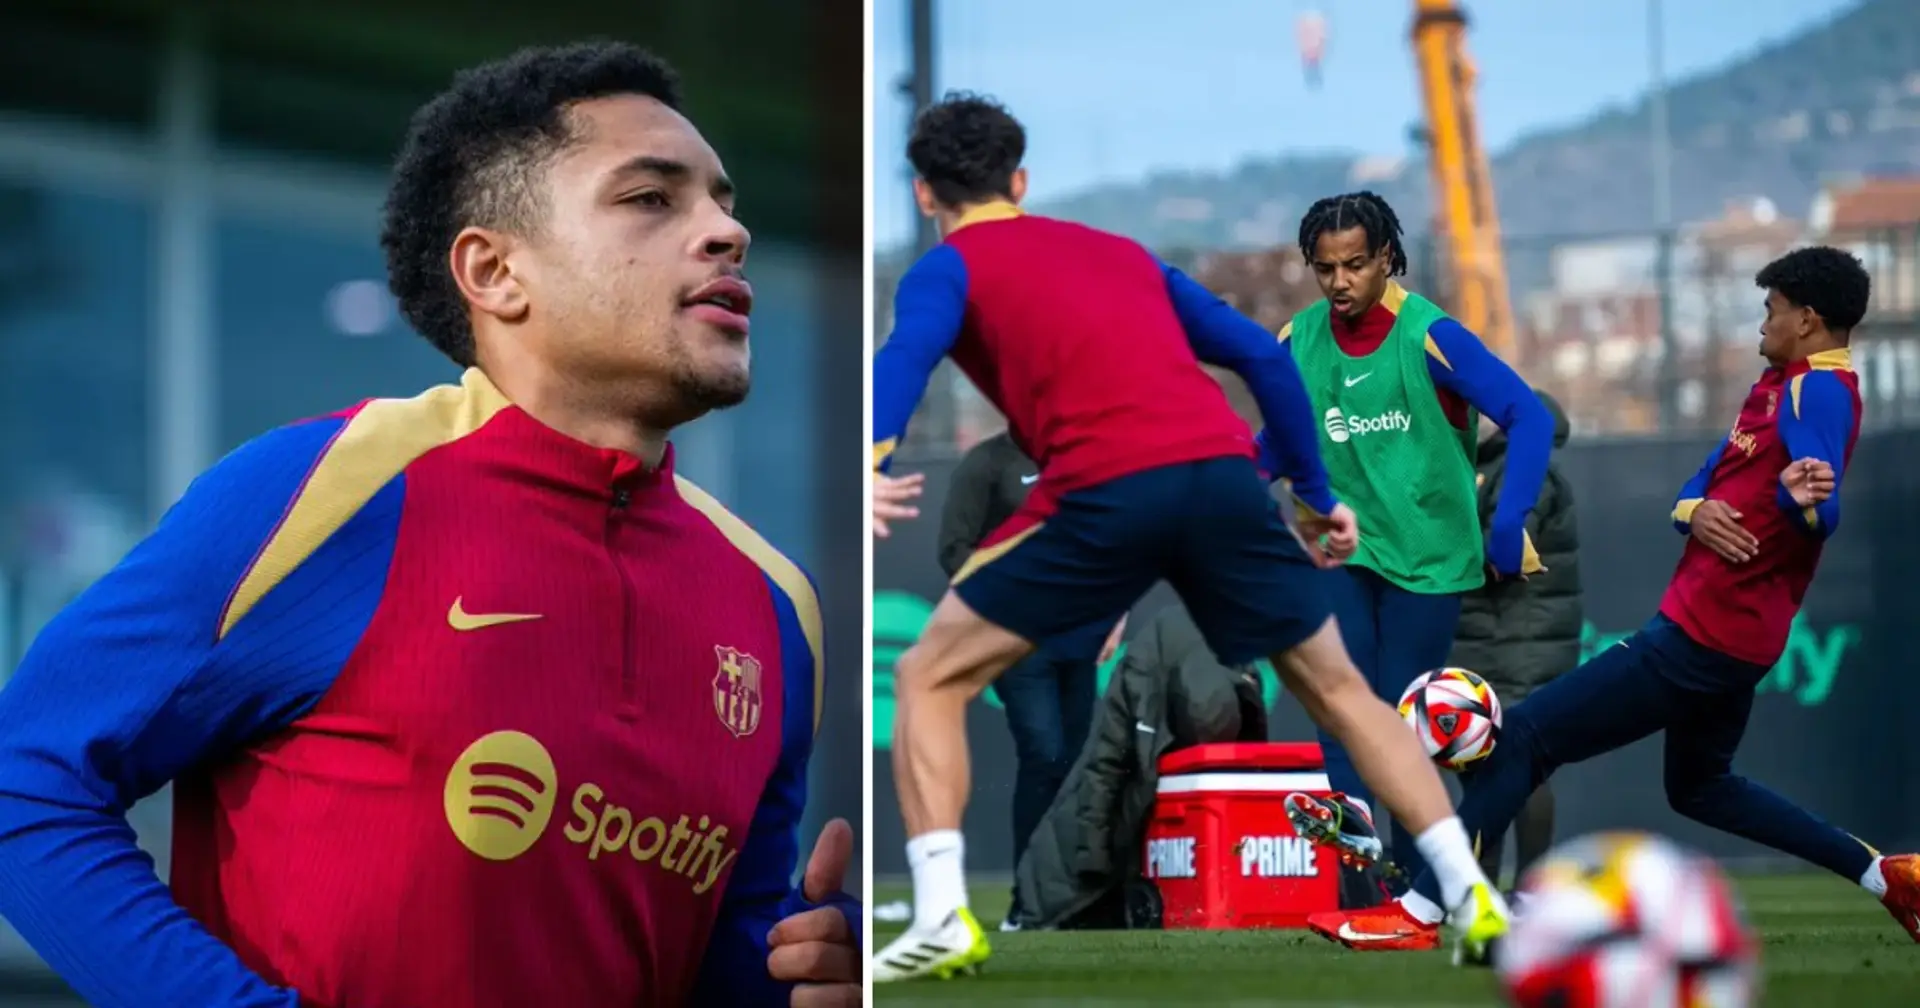 Barcelona players back in training ahead of Copa Del Rey clash – 10 best pics